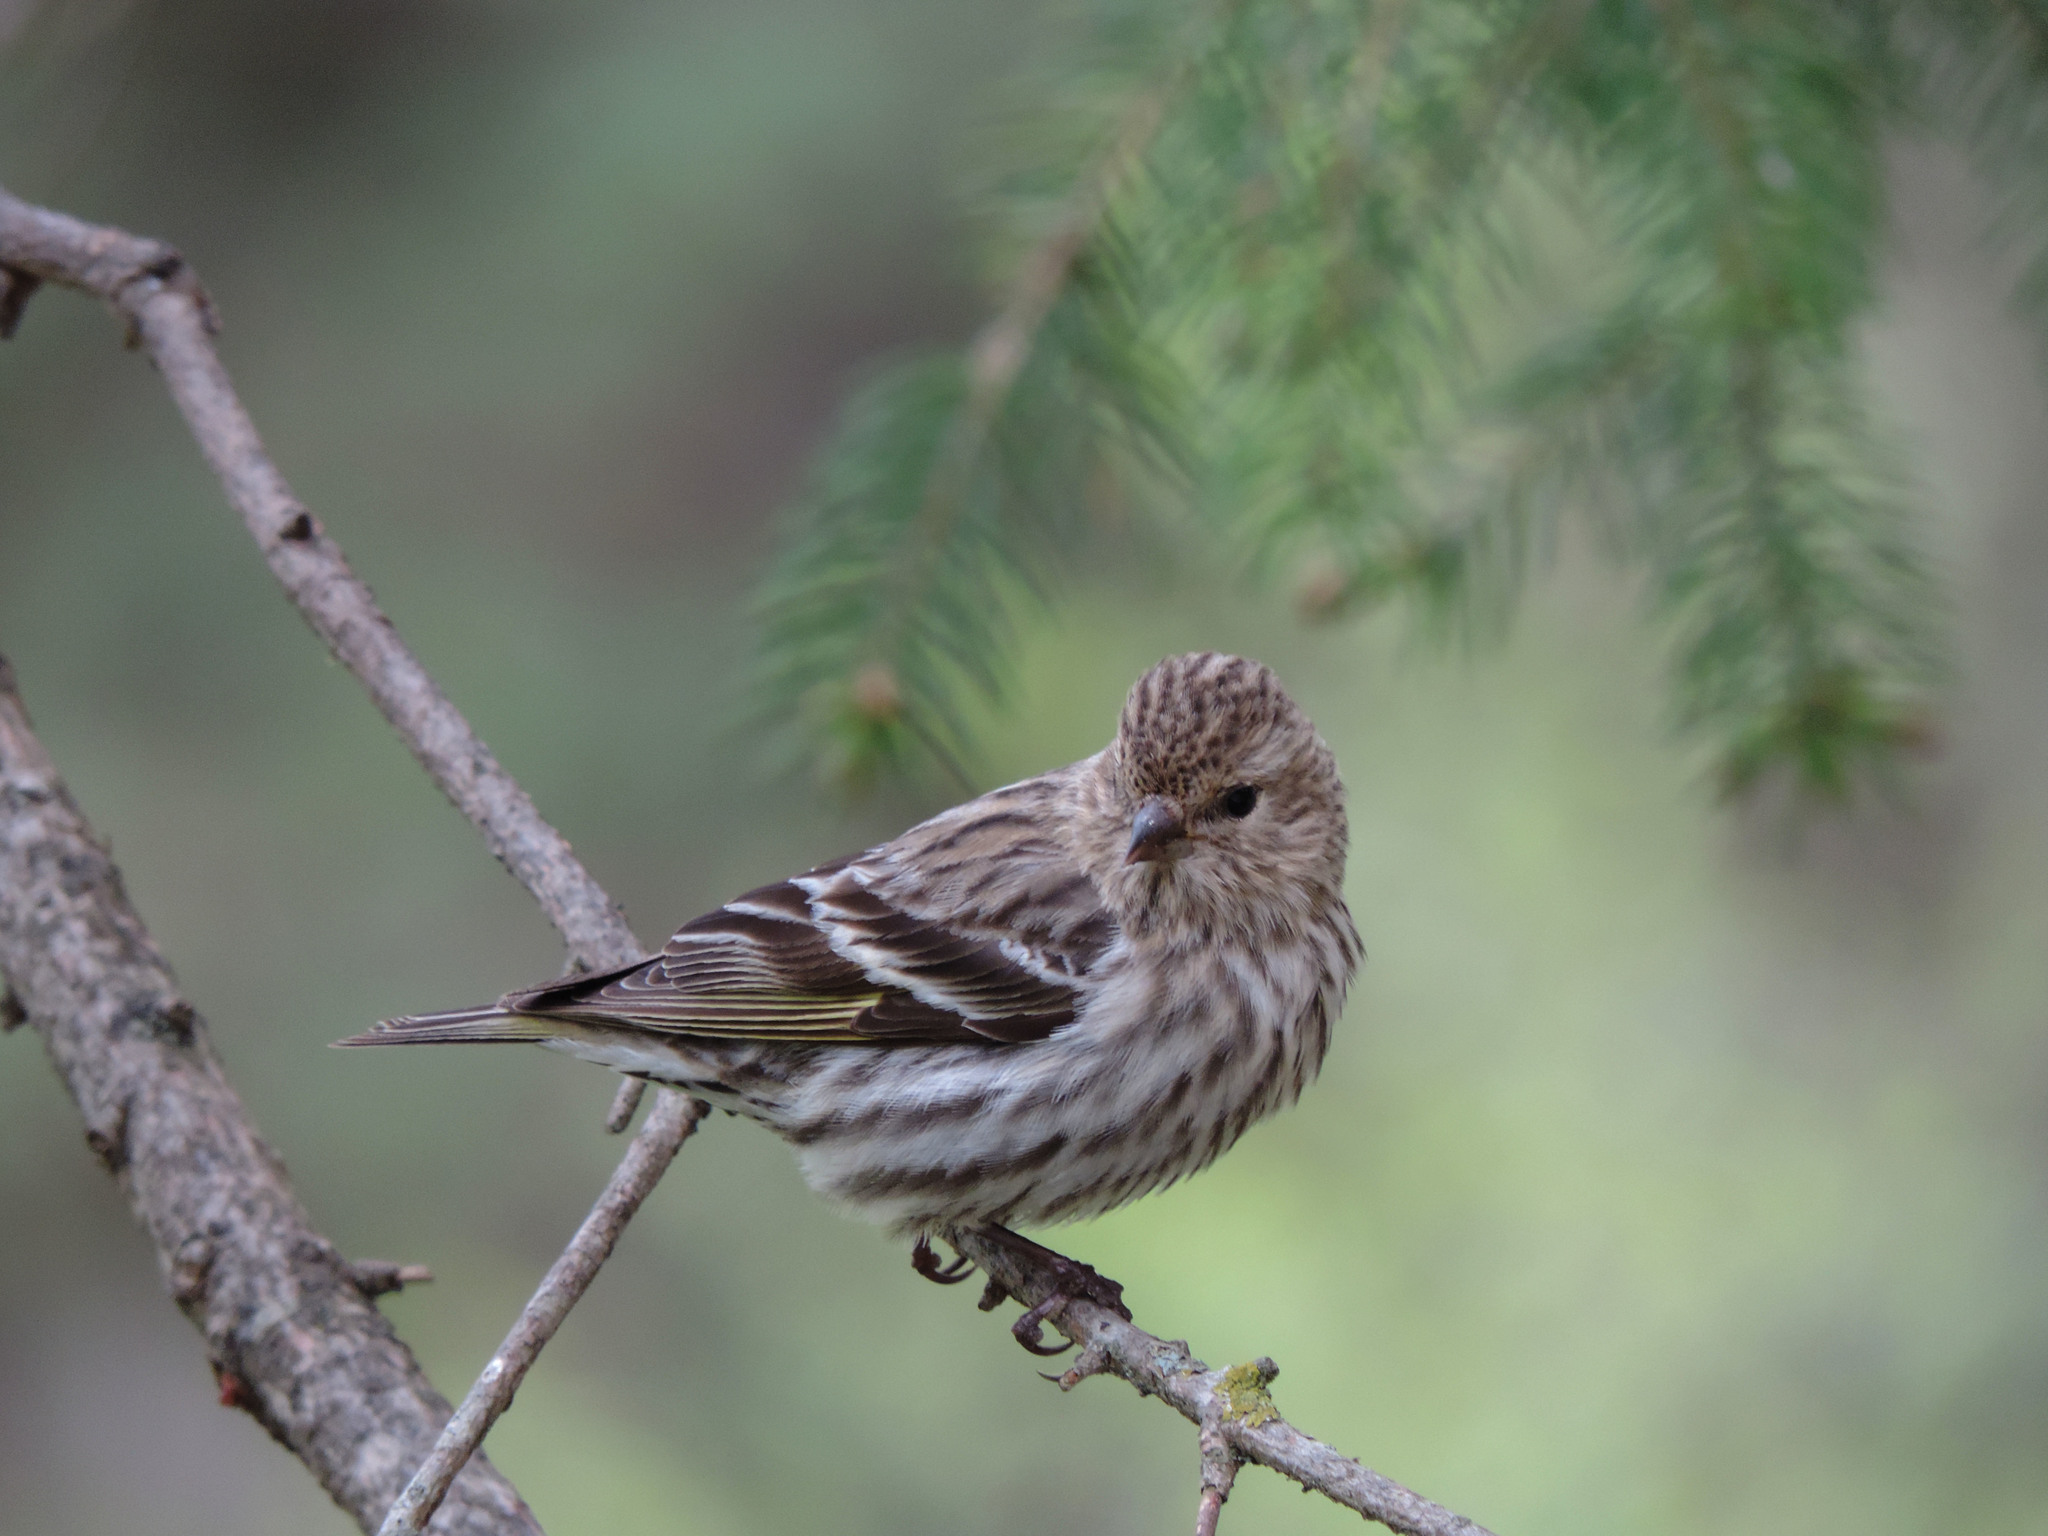 A pine siskin is perched on a bare branch. Behind it is a spruce bough. The bird is streaky with shades of grayish brown, pale yellow, white, and nearly black.